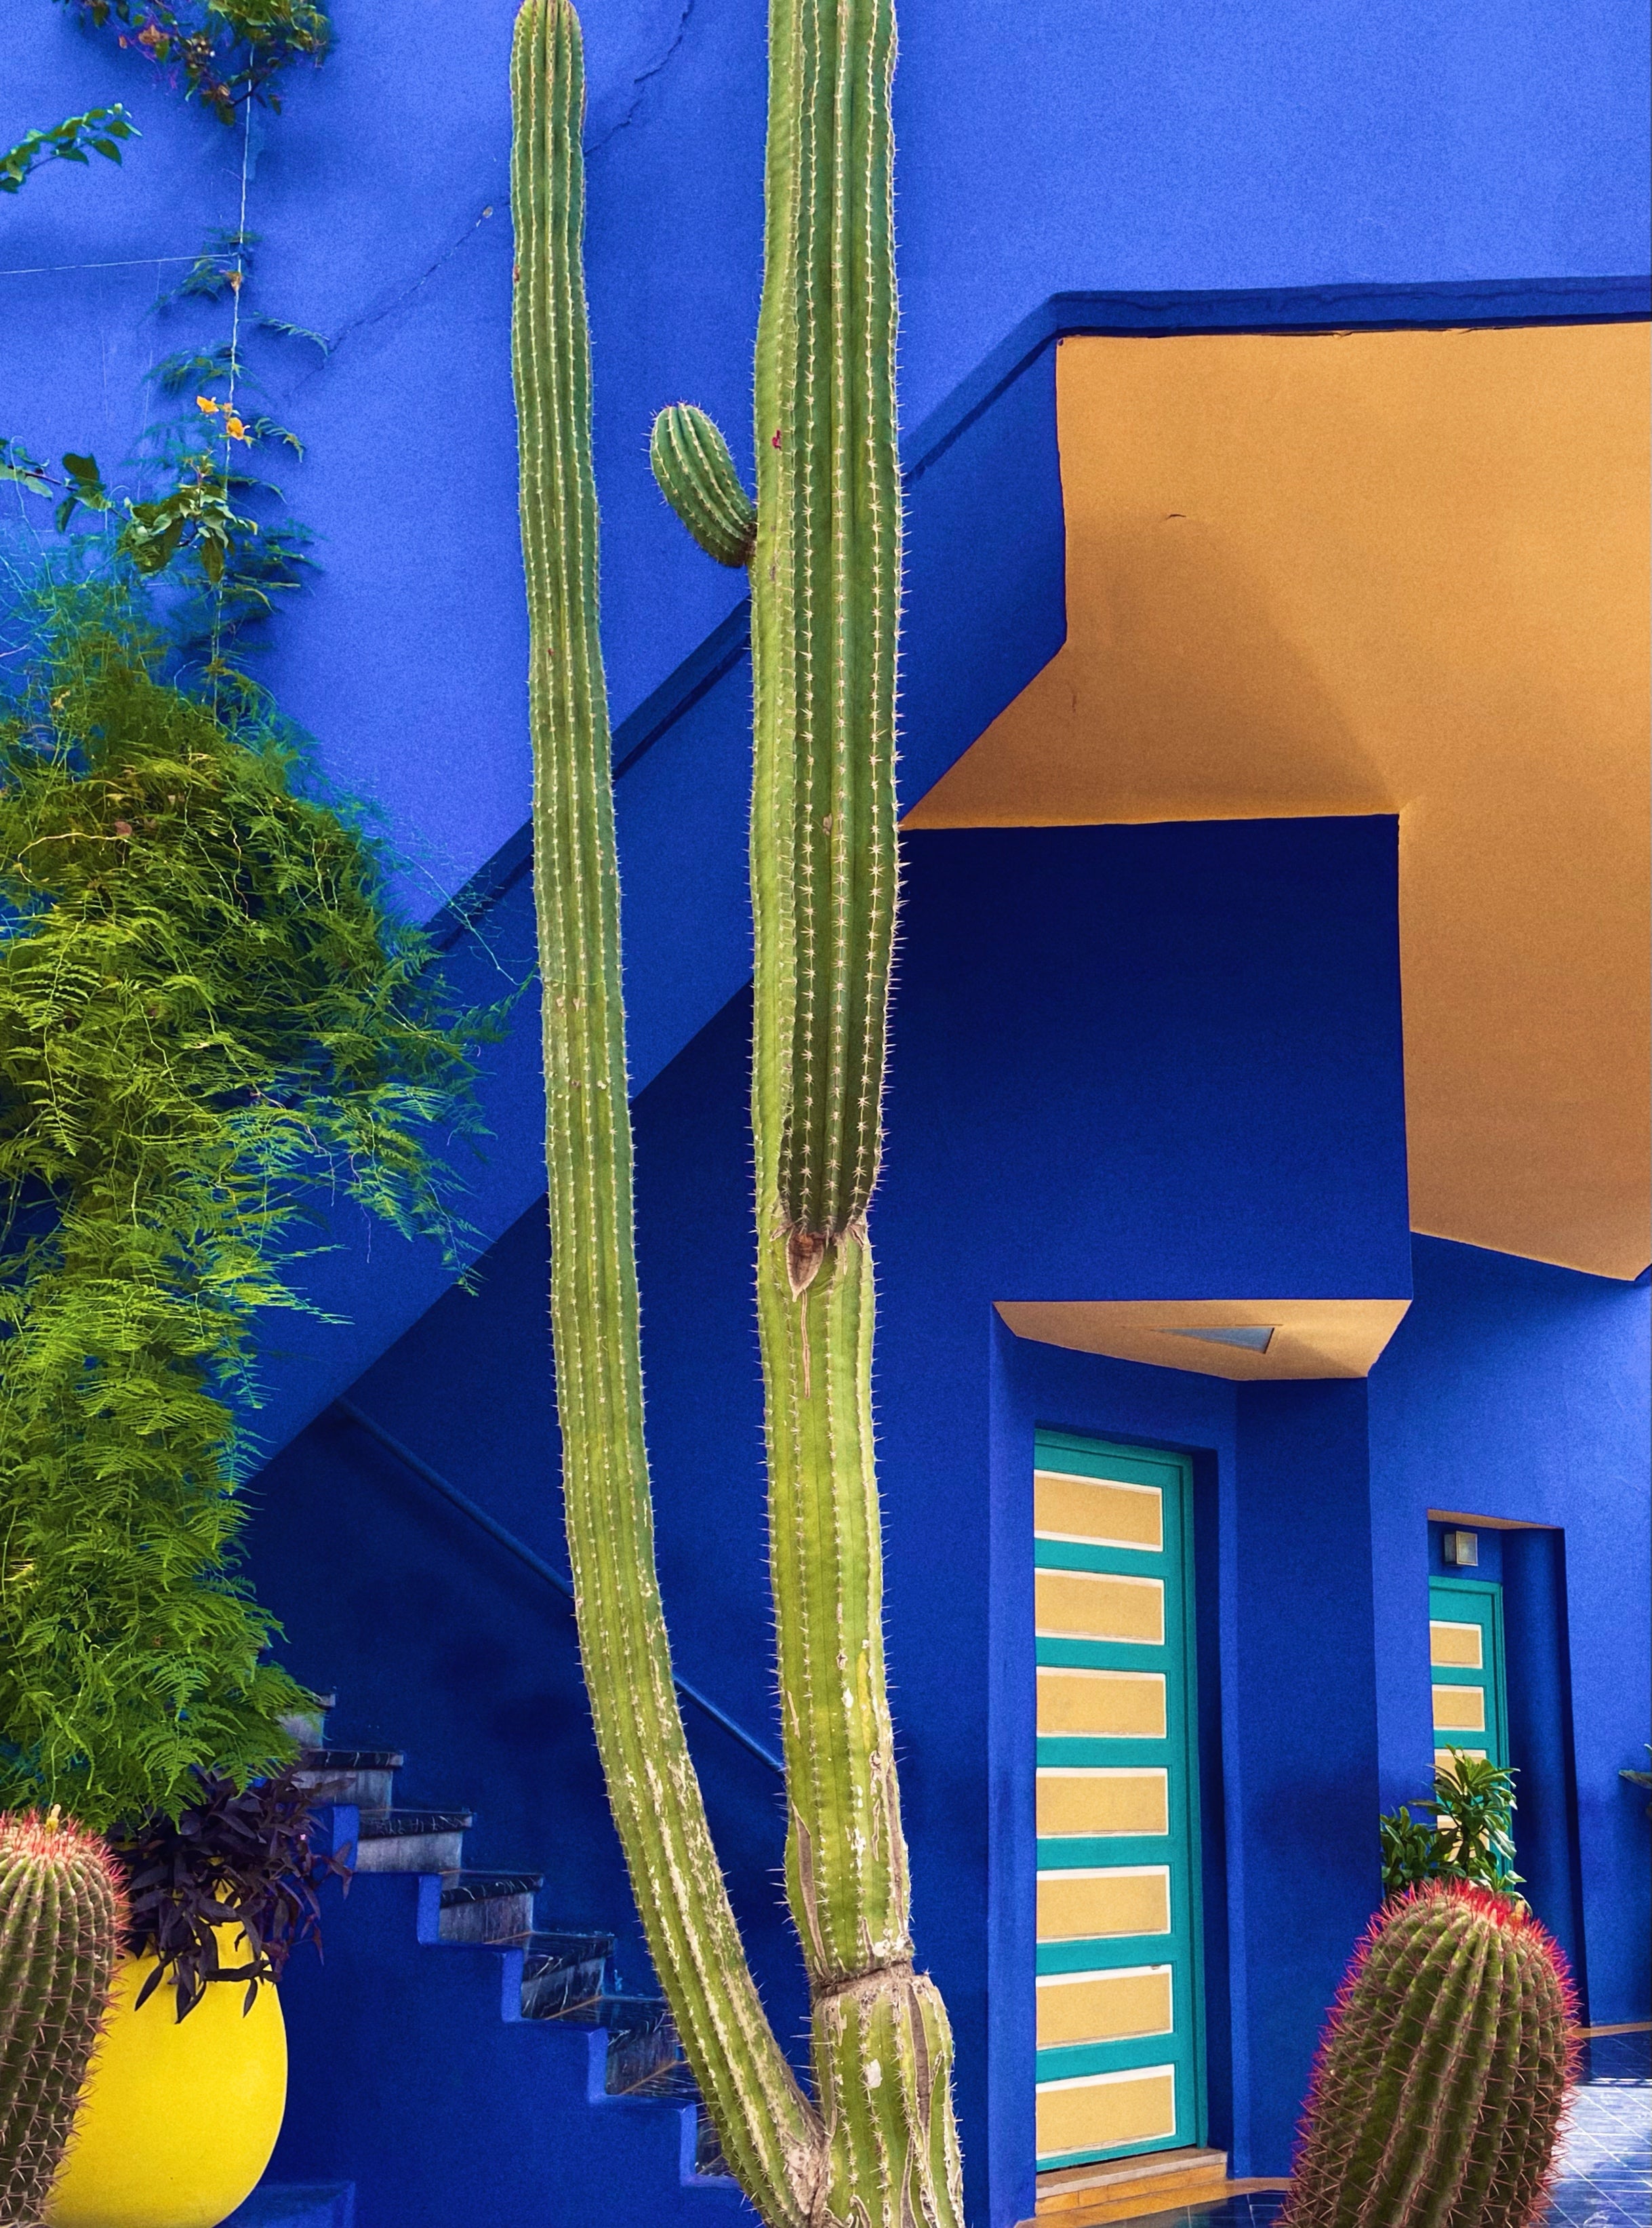 House of Yves Saint Laurent Marrakech bright blue building with cacti